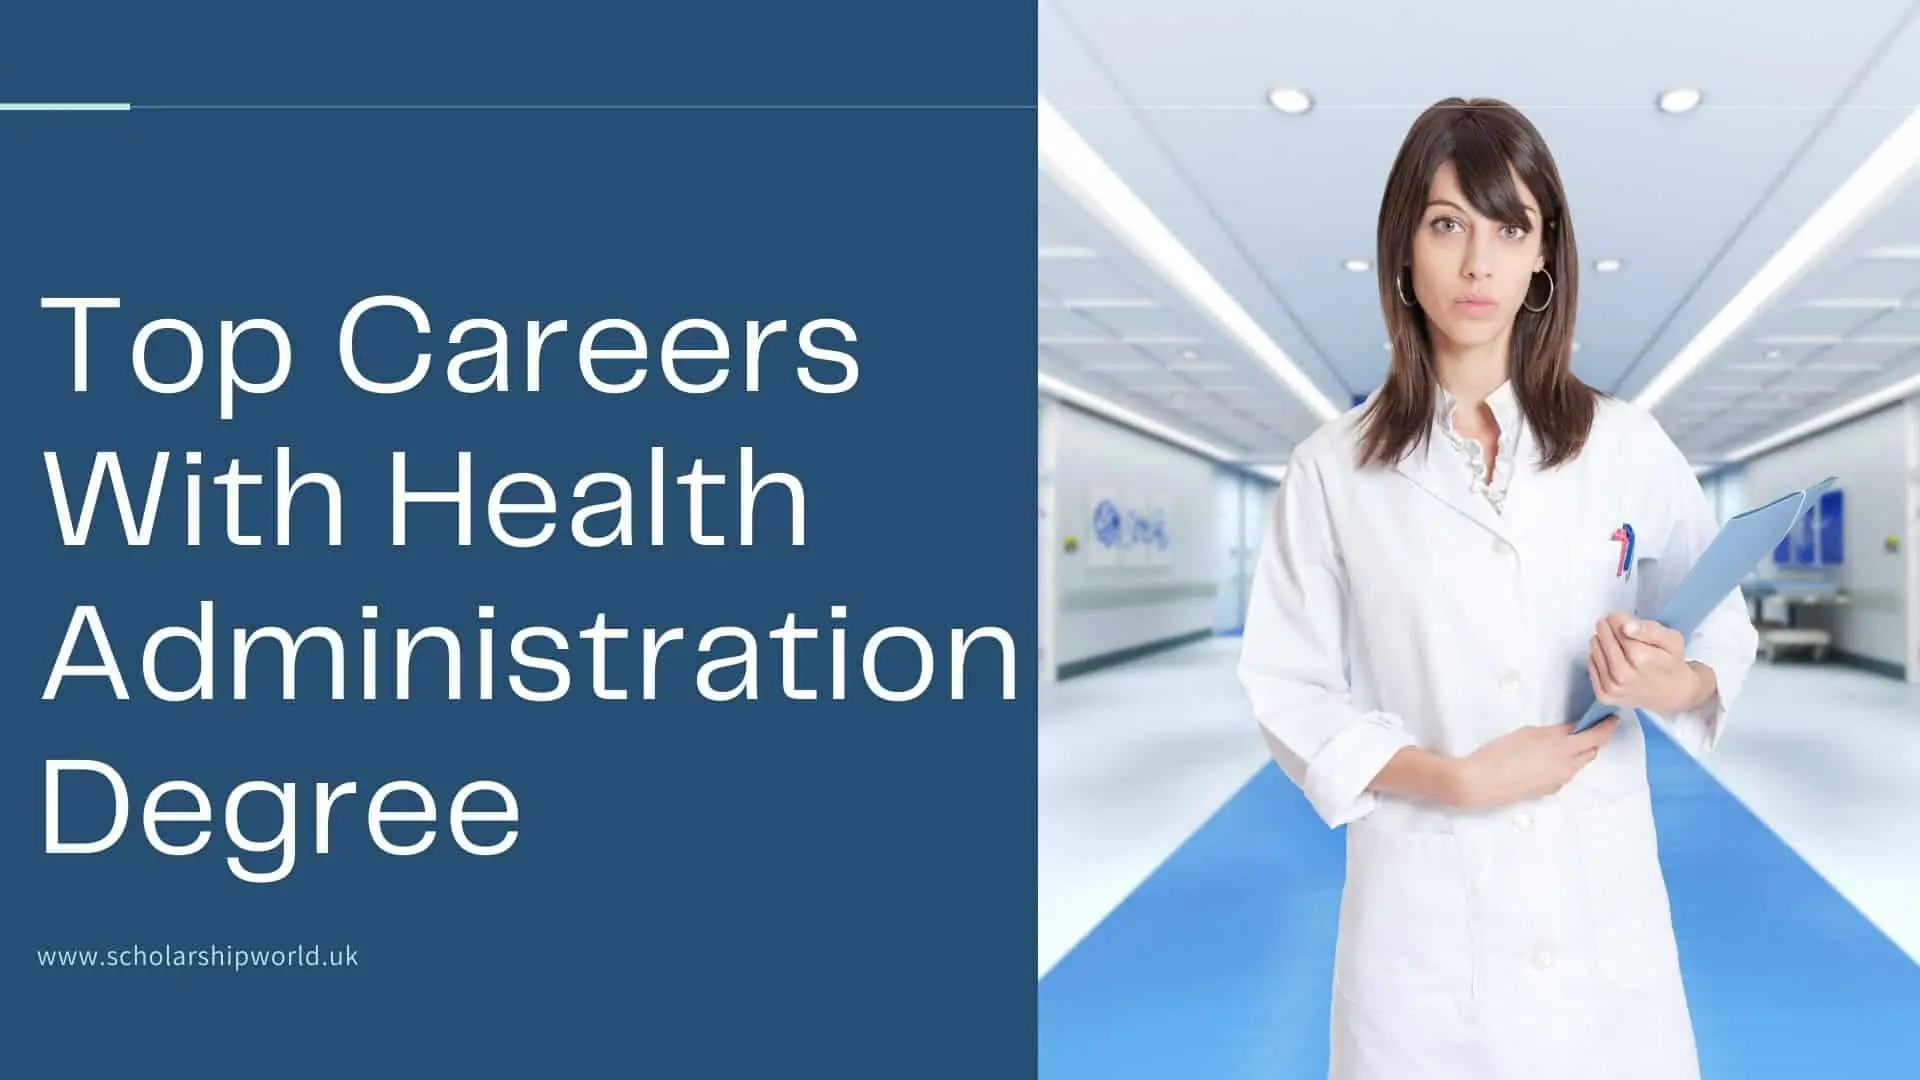 MUST READ: Top Careers With Health Administration Degree 2022